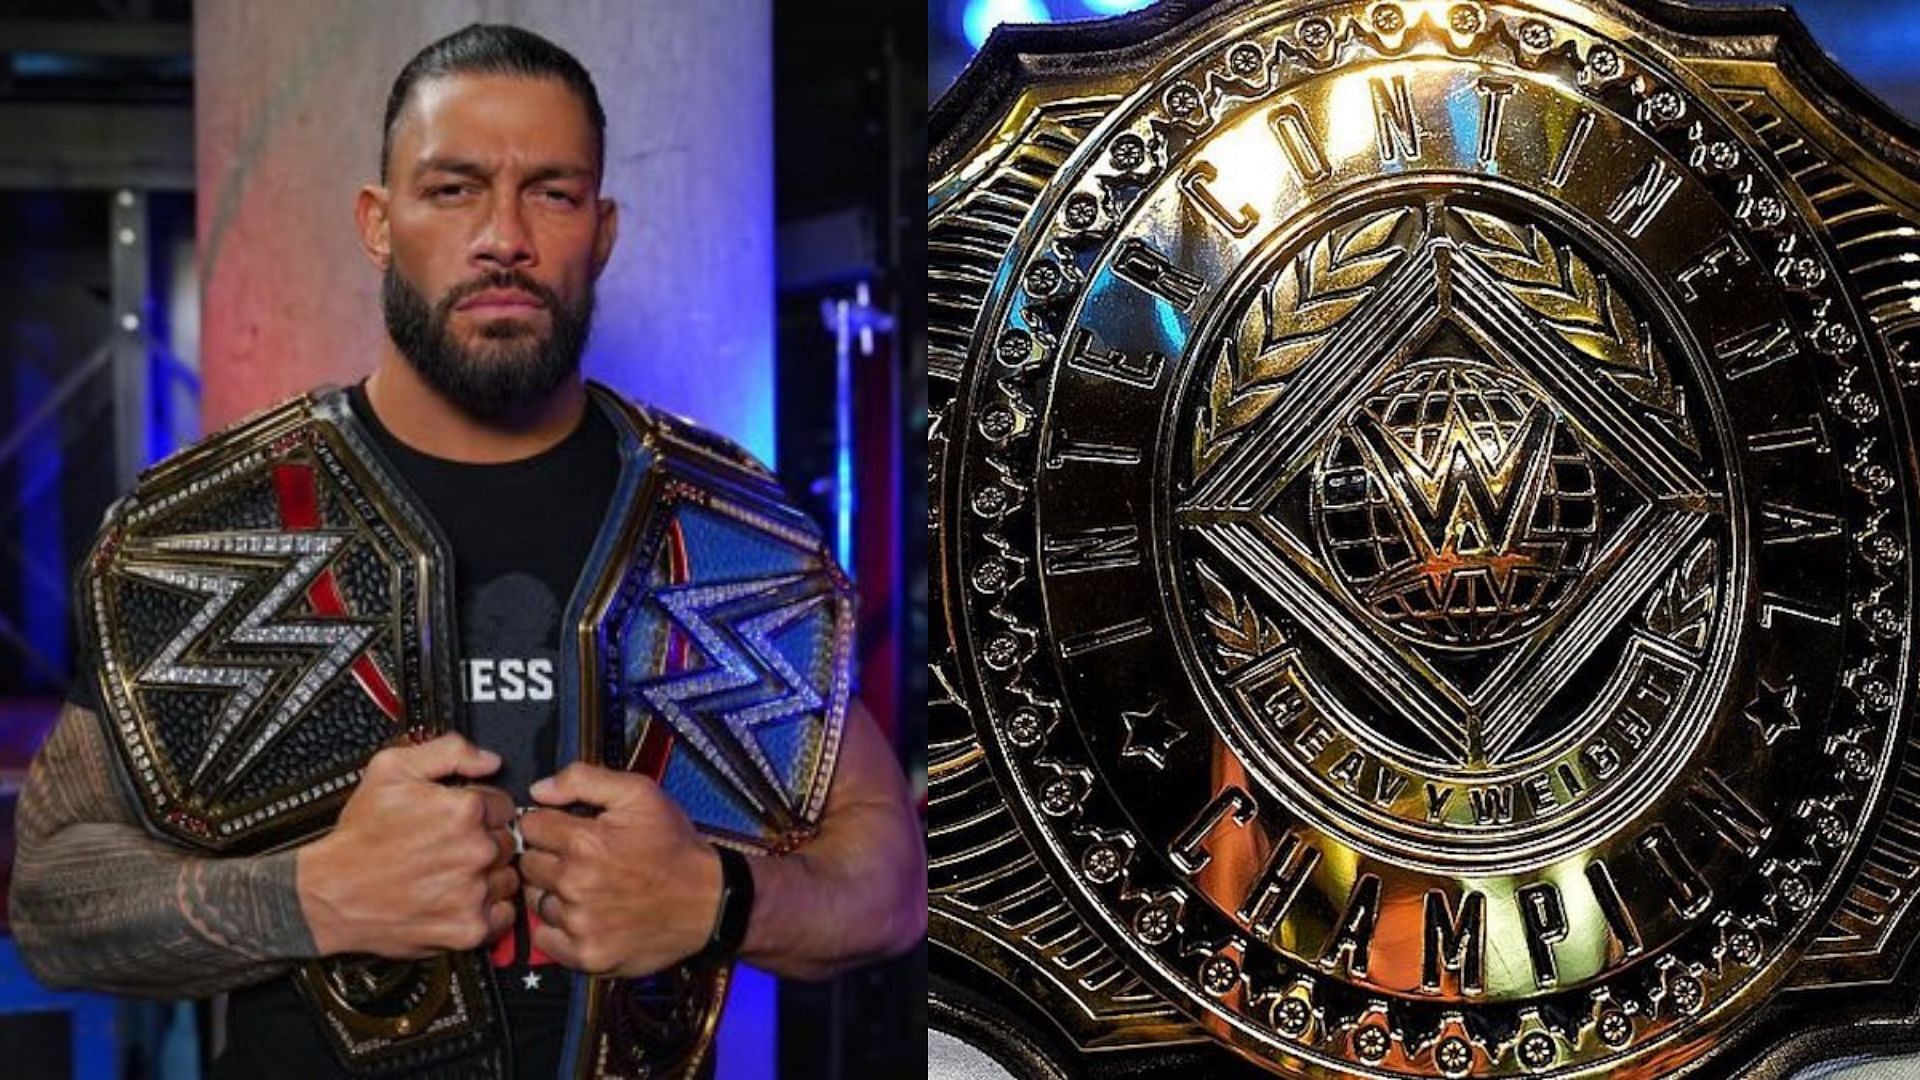 Roman Reigns is the current WWE Undisputed Universal Champion 